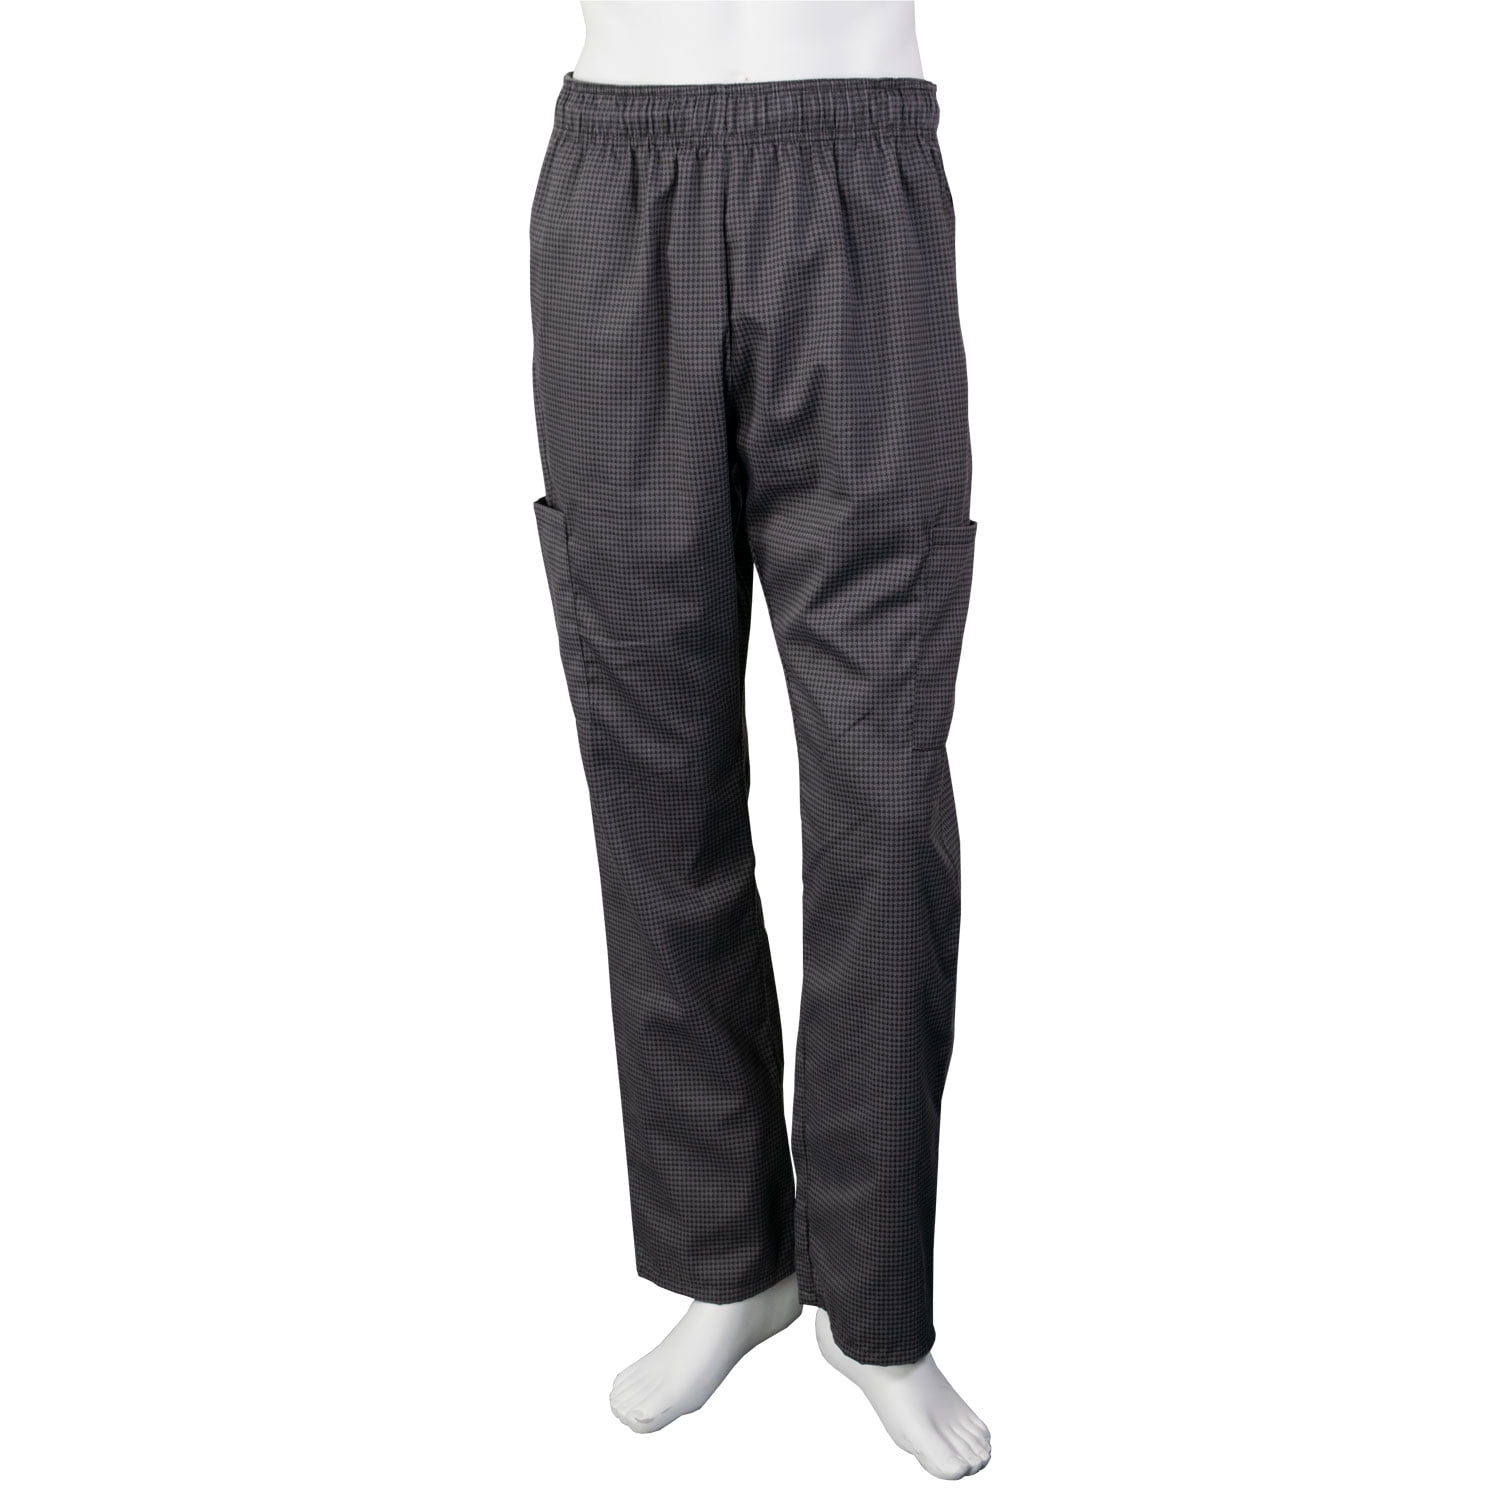 Chef Trousers Pants Elasticated Chefs White Bottoms Cooks Bar Unisex Mens Ladies